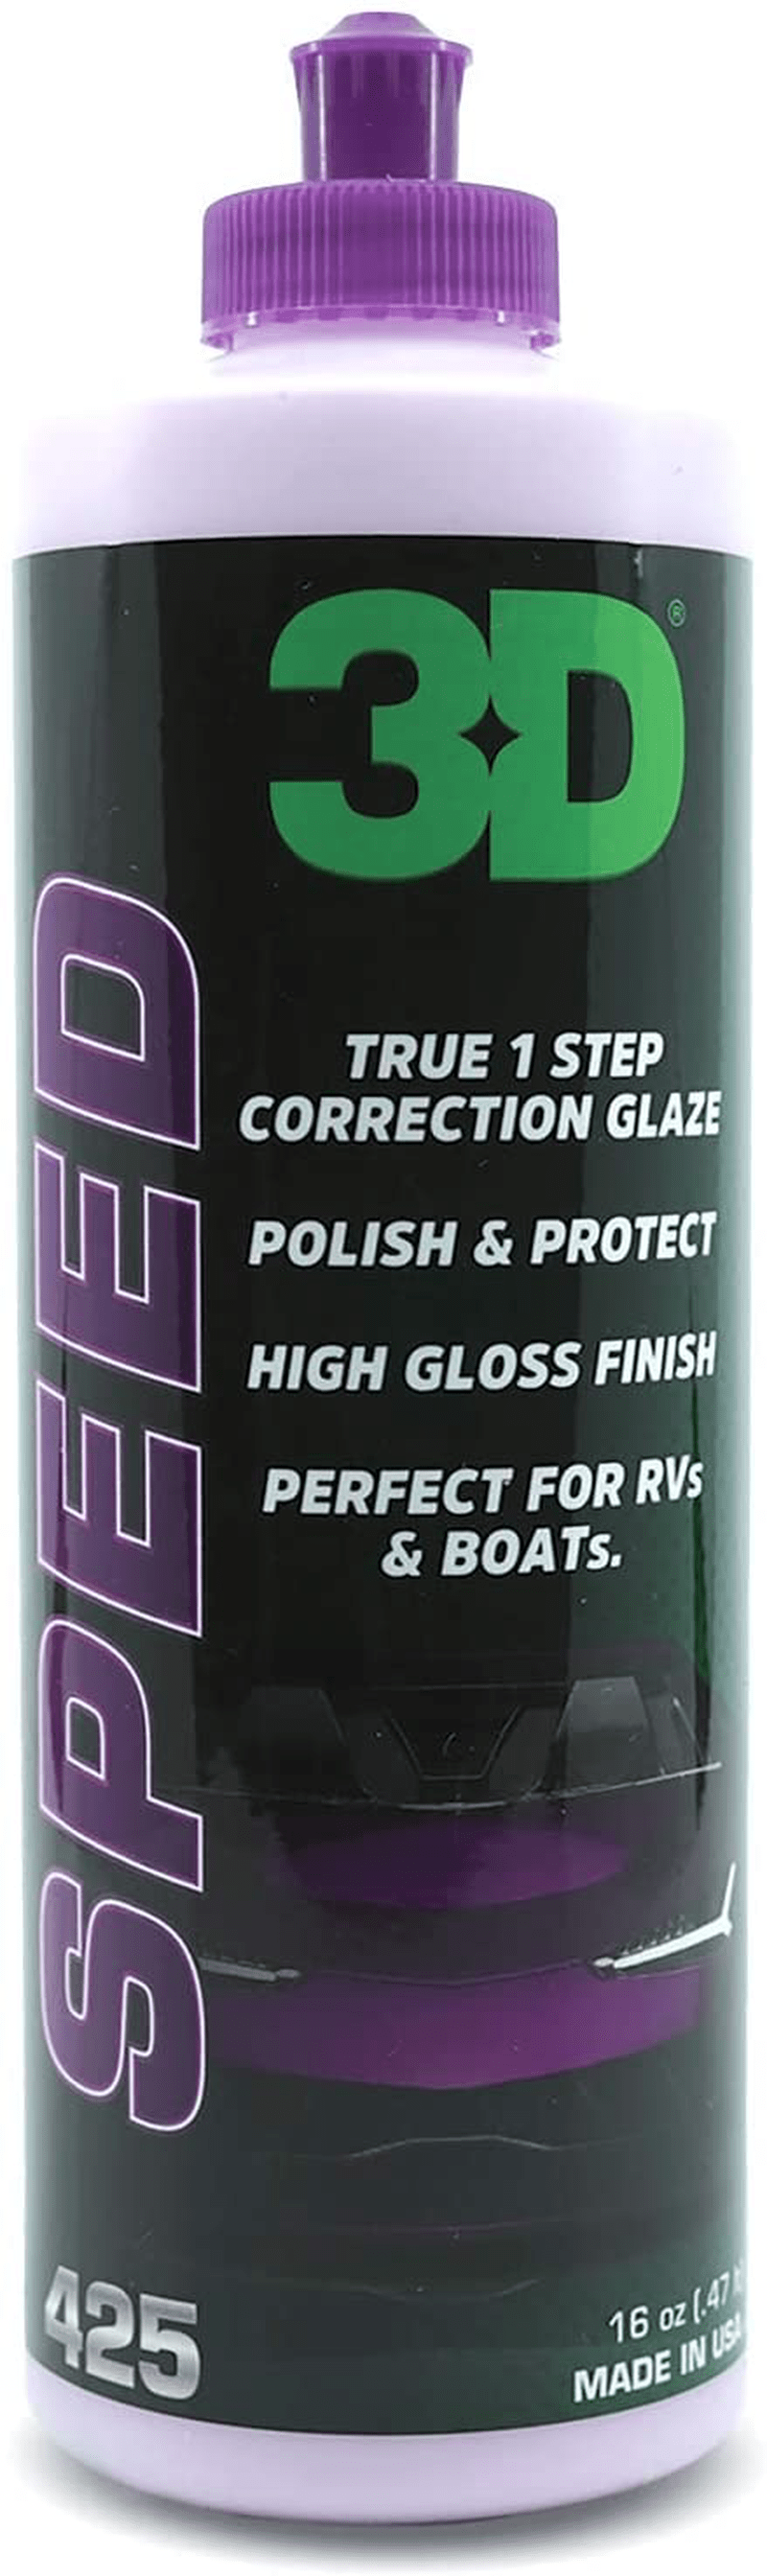 3D Speed Car Polish & Wax – 16oz – All-In-One Scratch Remover & Swirl Correction with Wax Protection